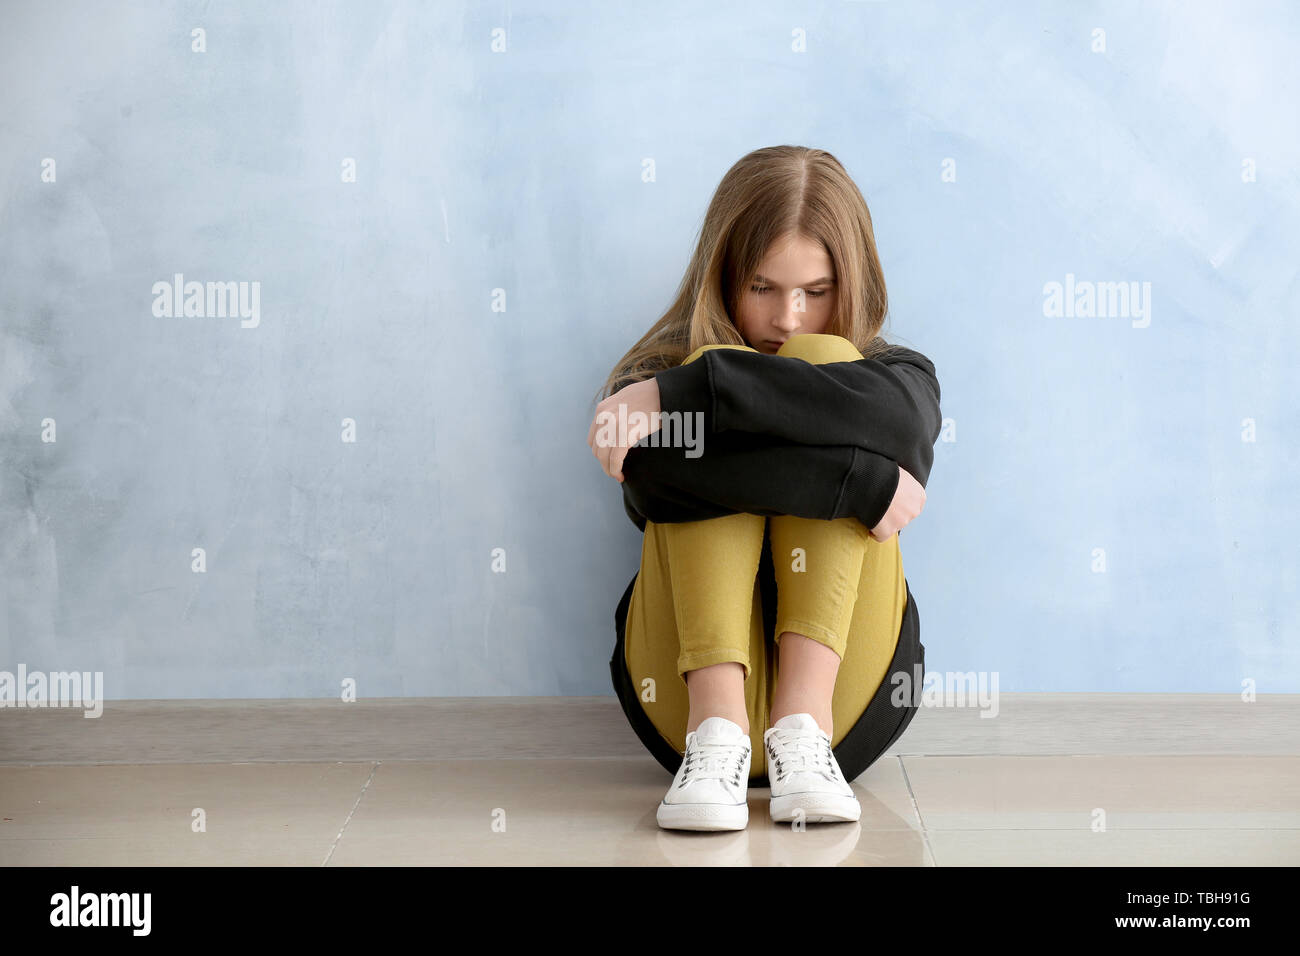 645 Profile Sad Teenager Stock Photos - Free & Royalty-Free Stock Photos  from Dreamstime